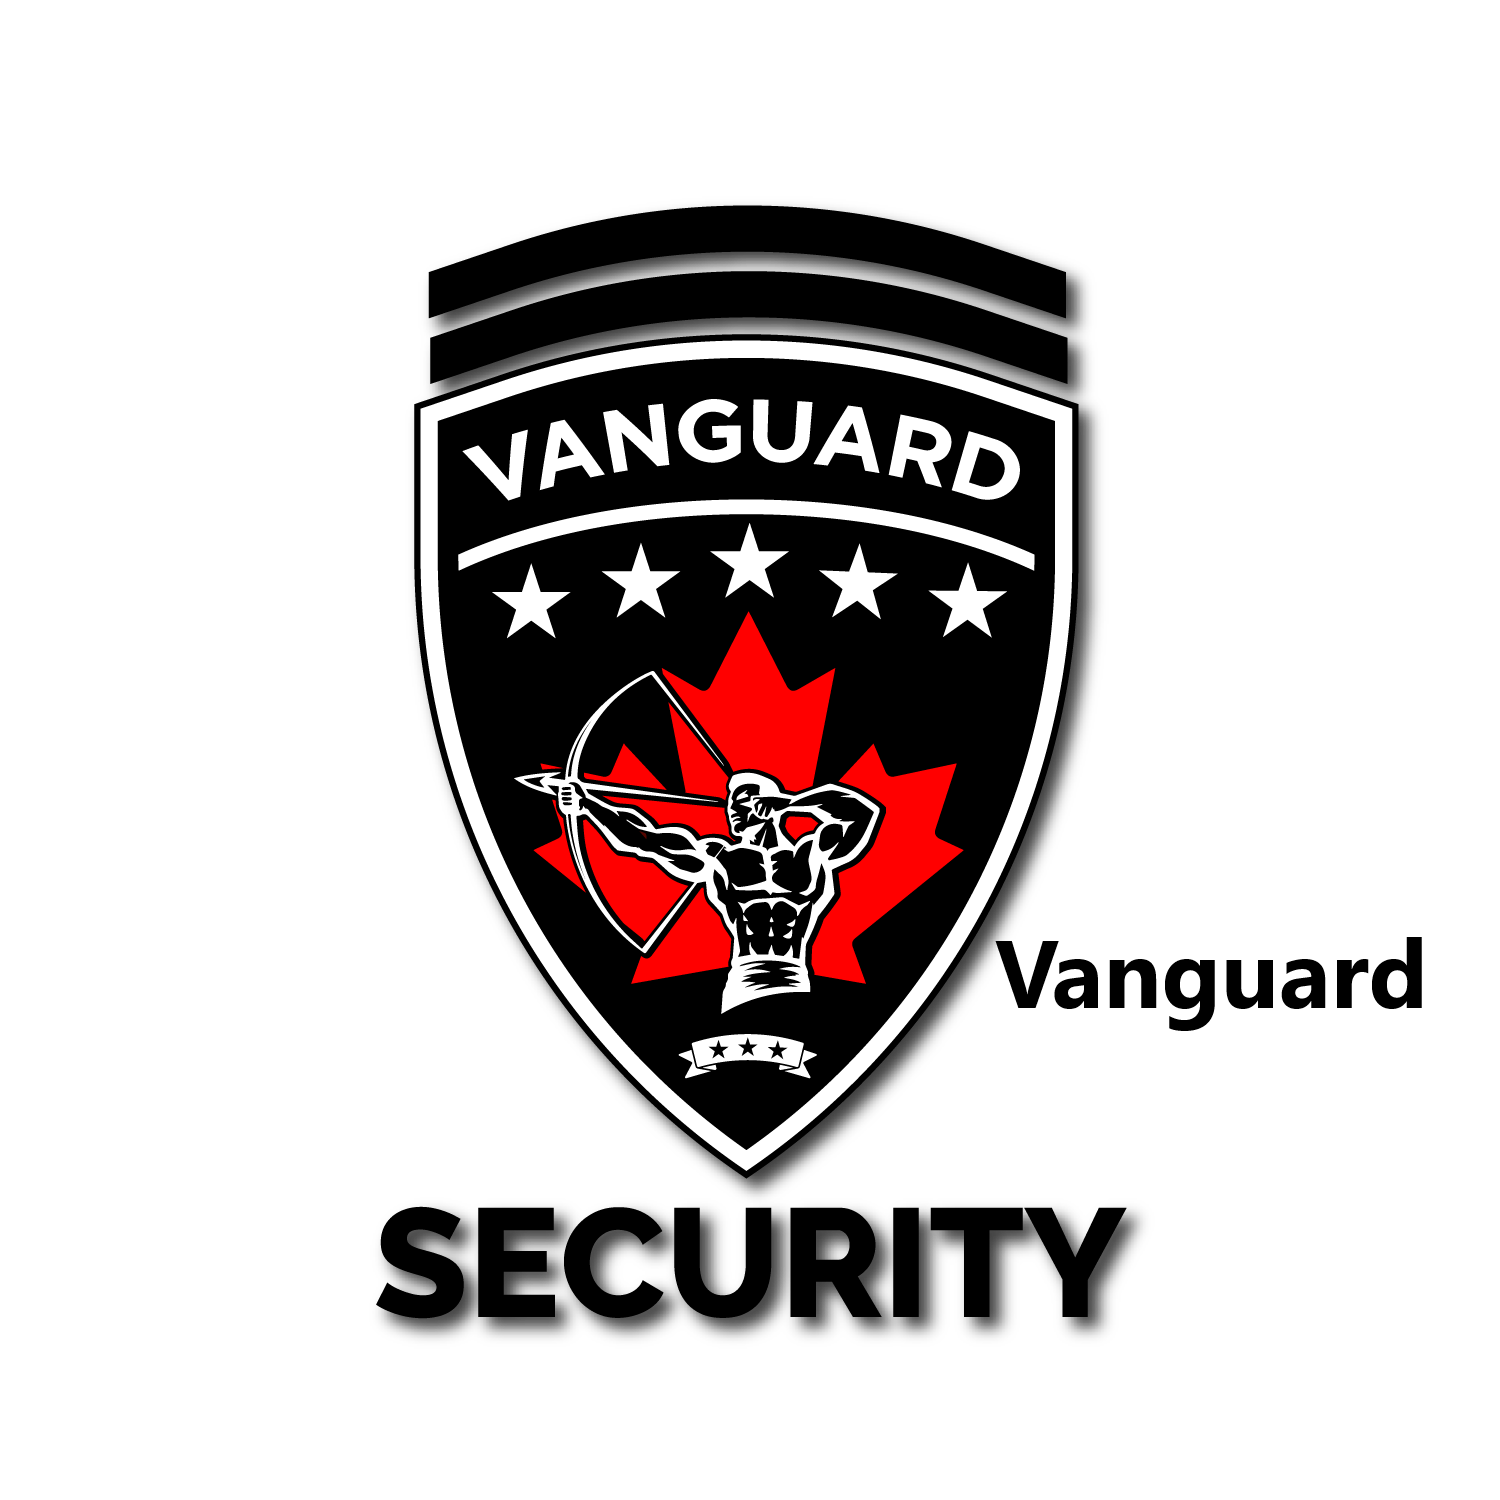 Vanguard Protection & Security Services Inc.